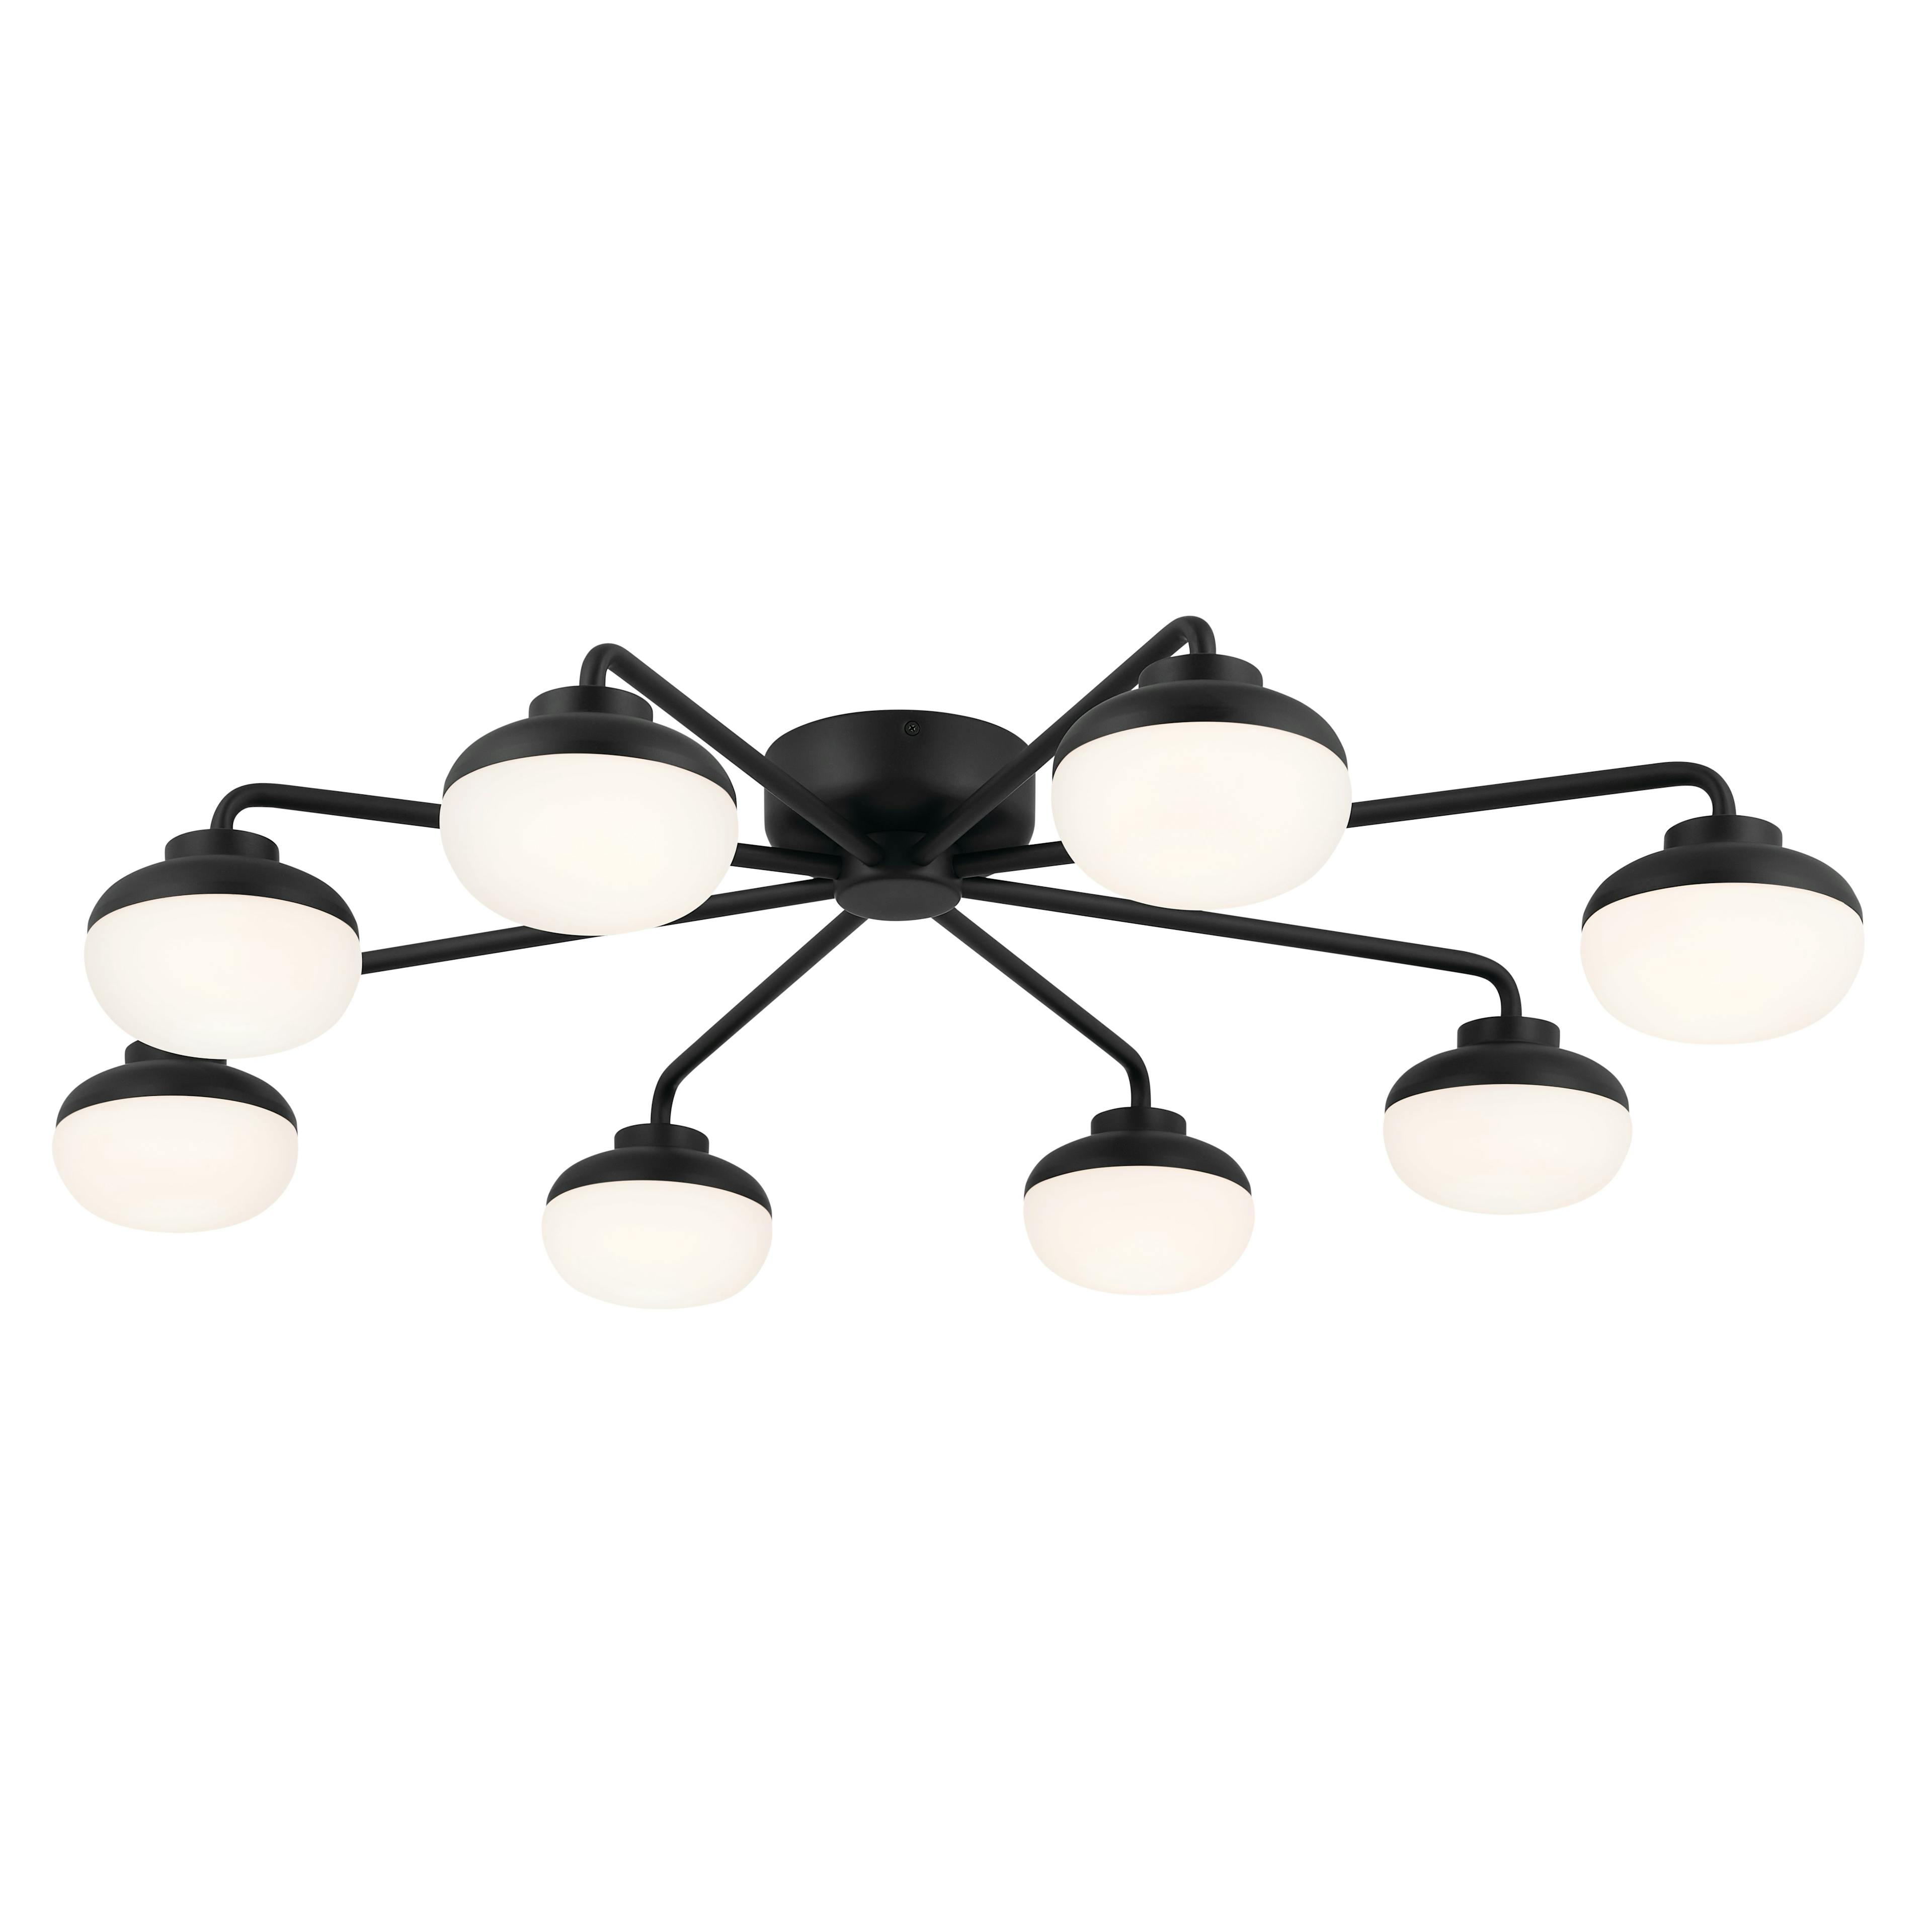 Remy 41 Inch 8 Light LED Flush Mount with Satin Etched Cased Opal Glass in Black on a white background